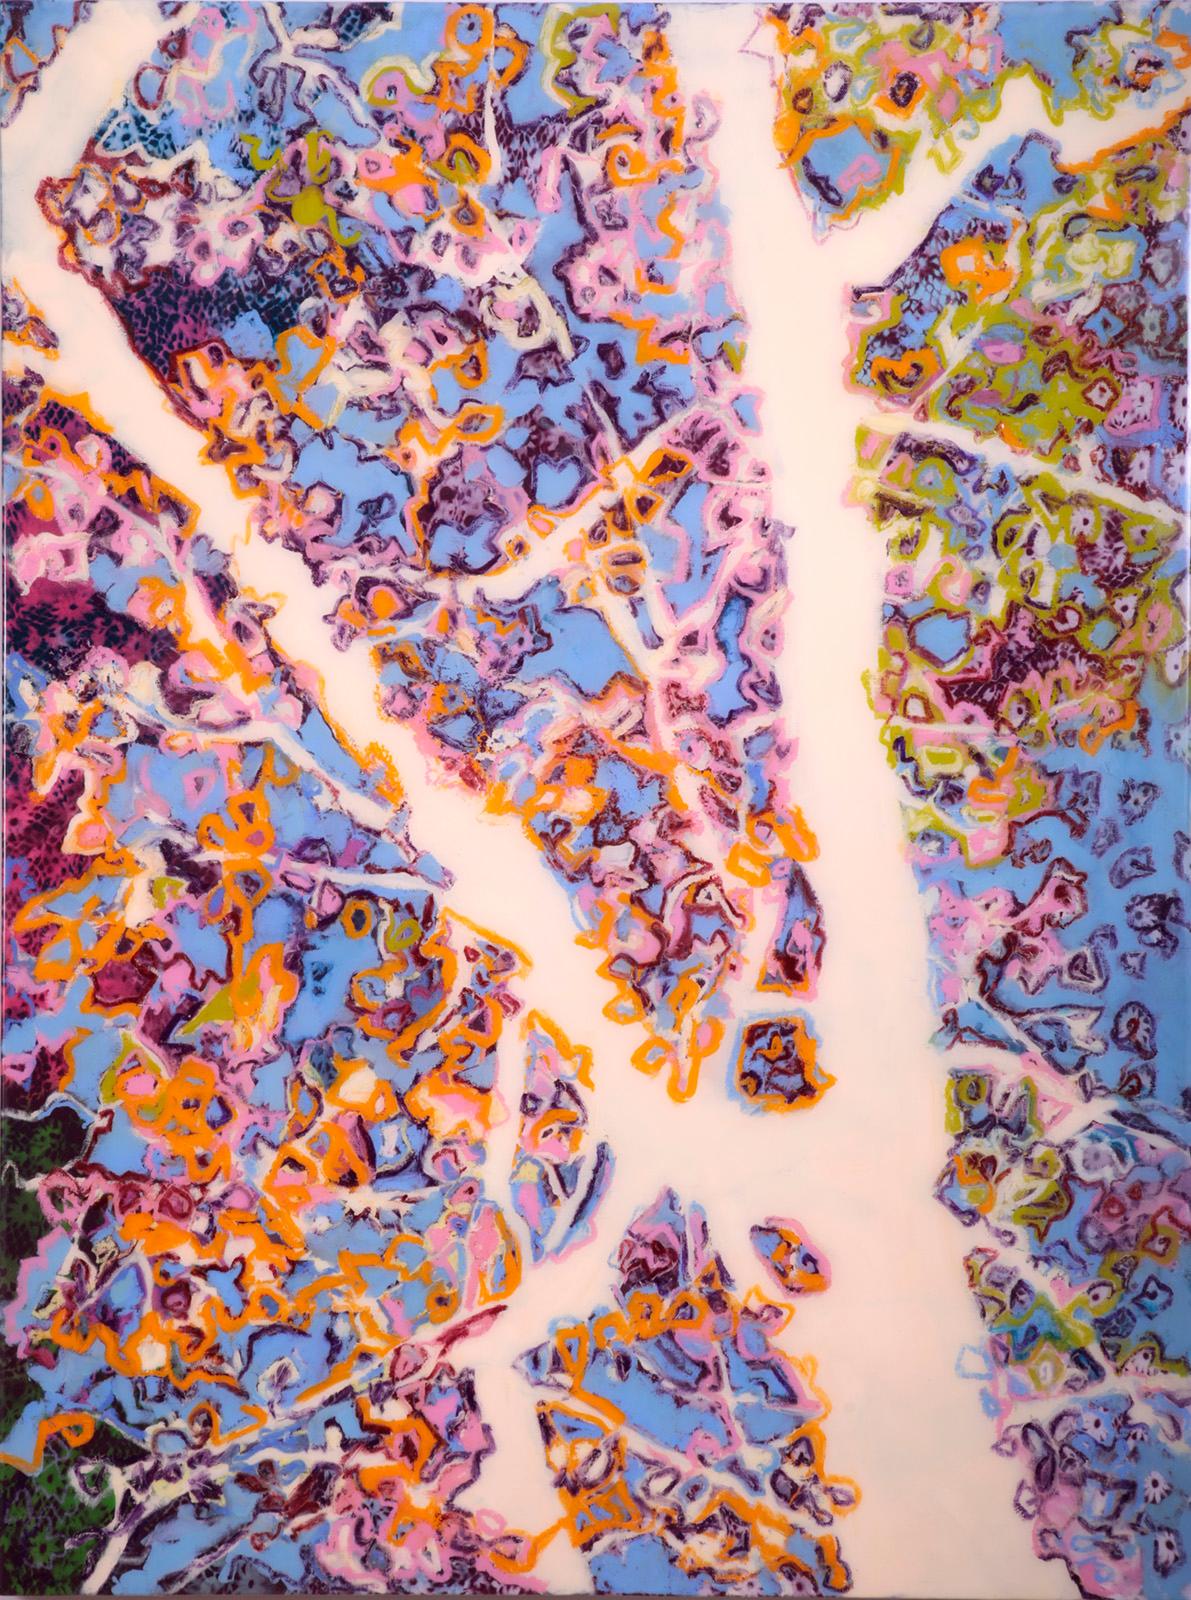 Rebecca Darlington Abstract Painting – "Splendor From The Sun", white trees against pink and orange leaves, blue sky